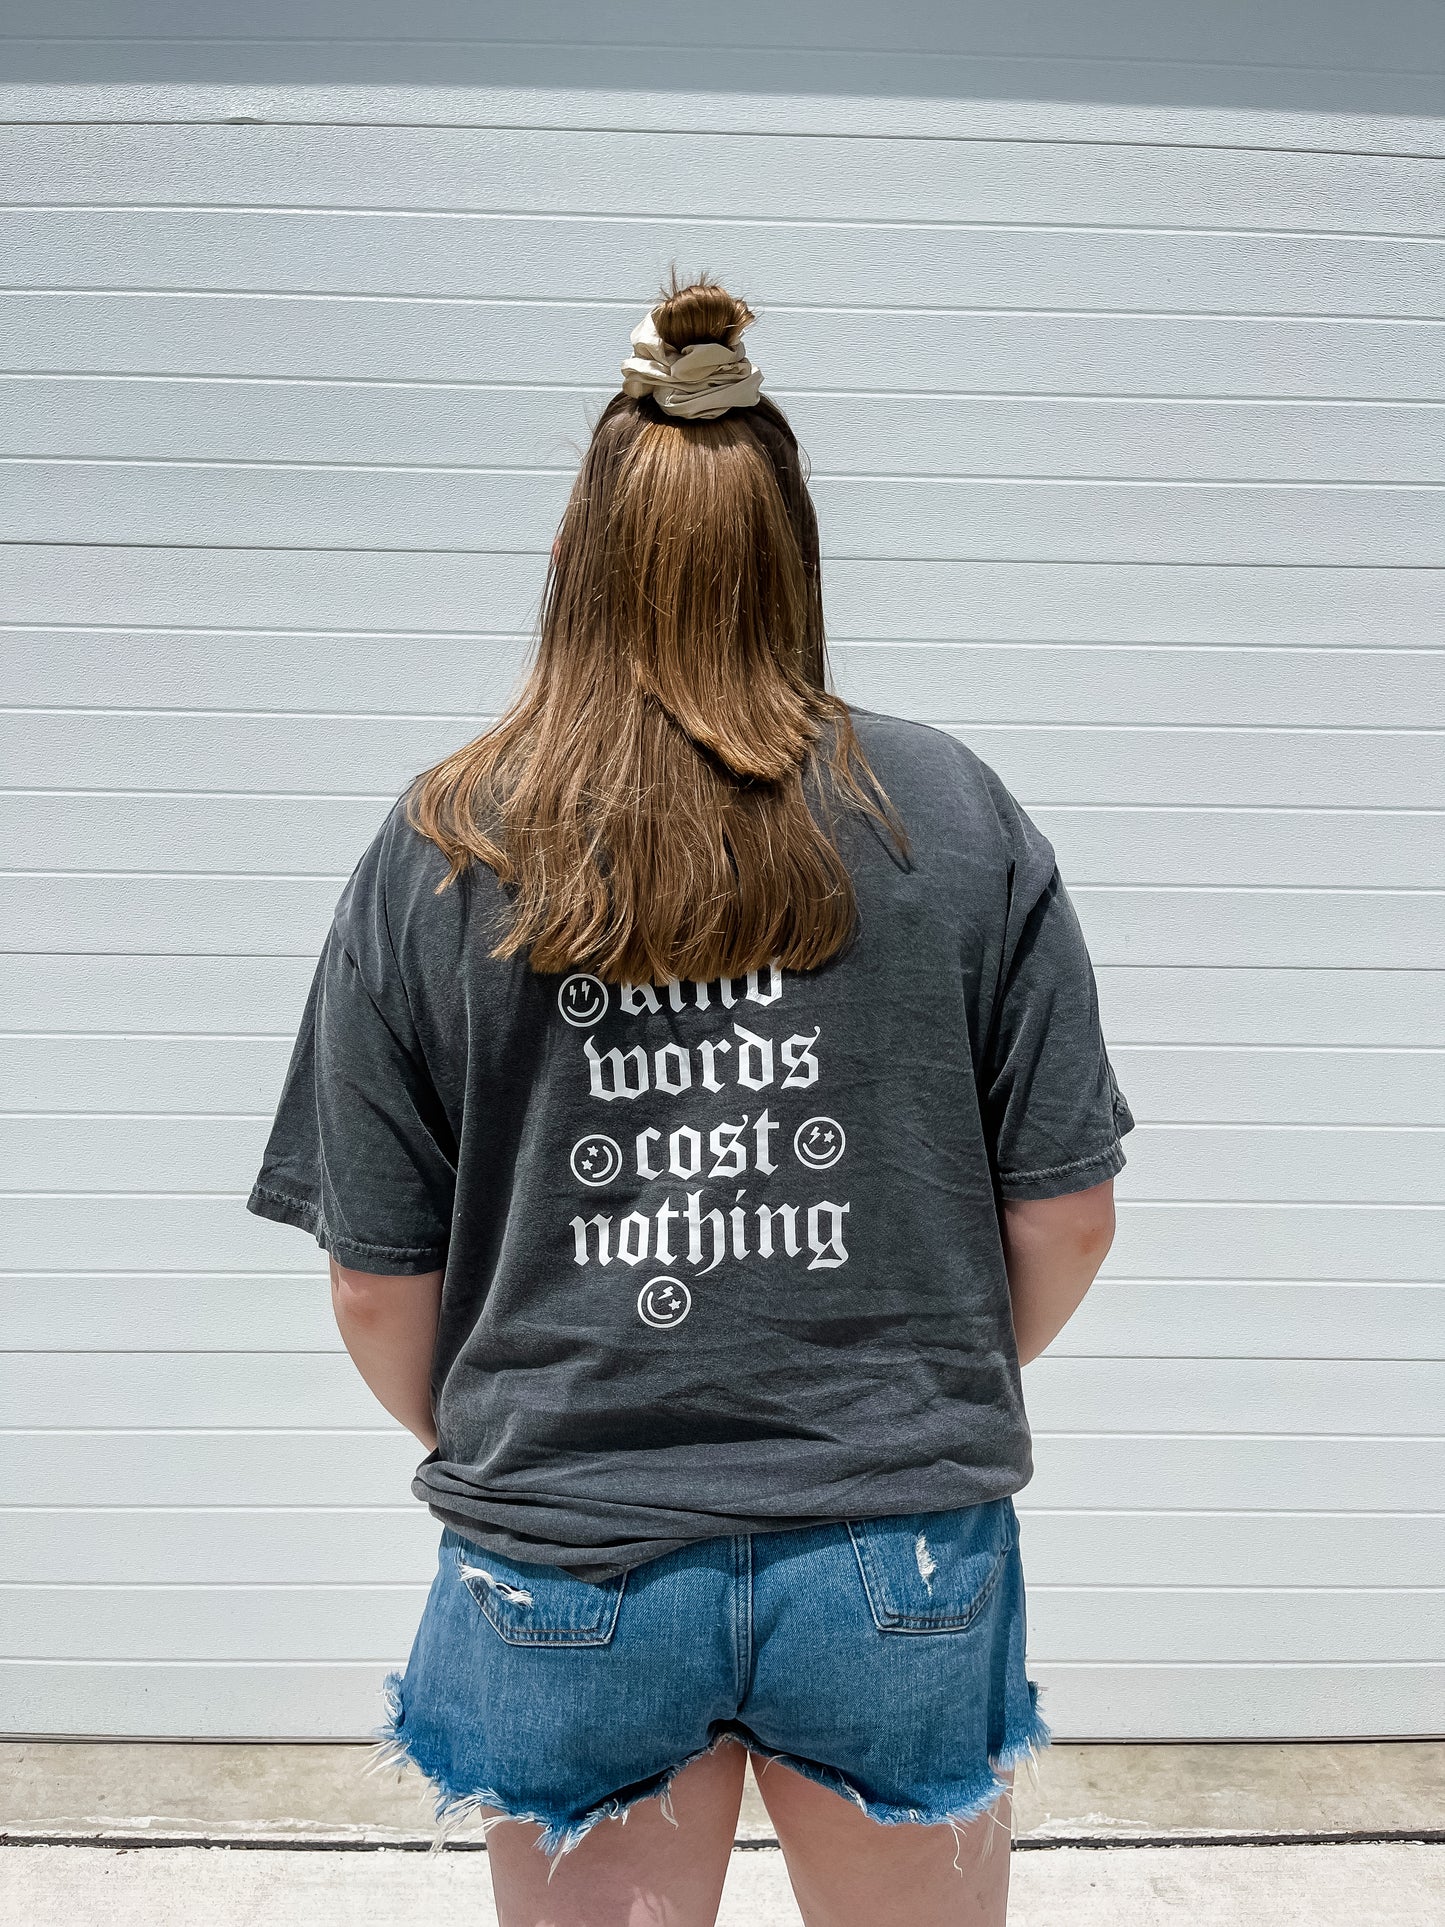 Kind Words Cost Nothing Tee Shirt